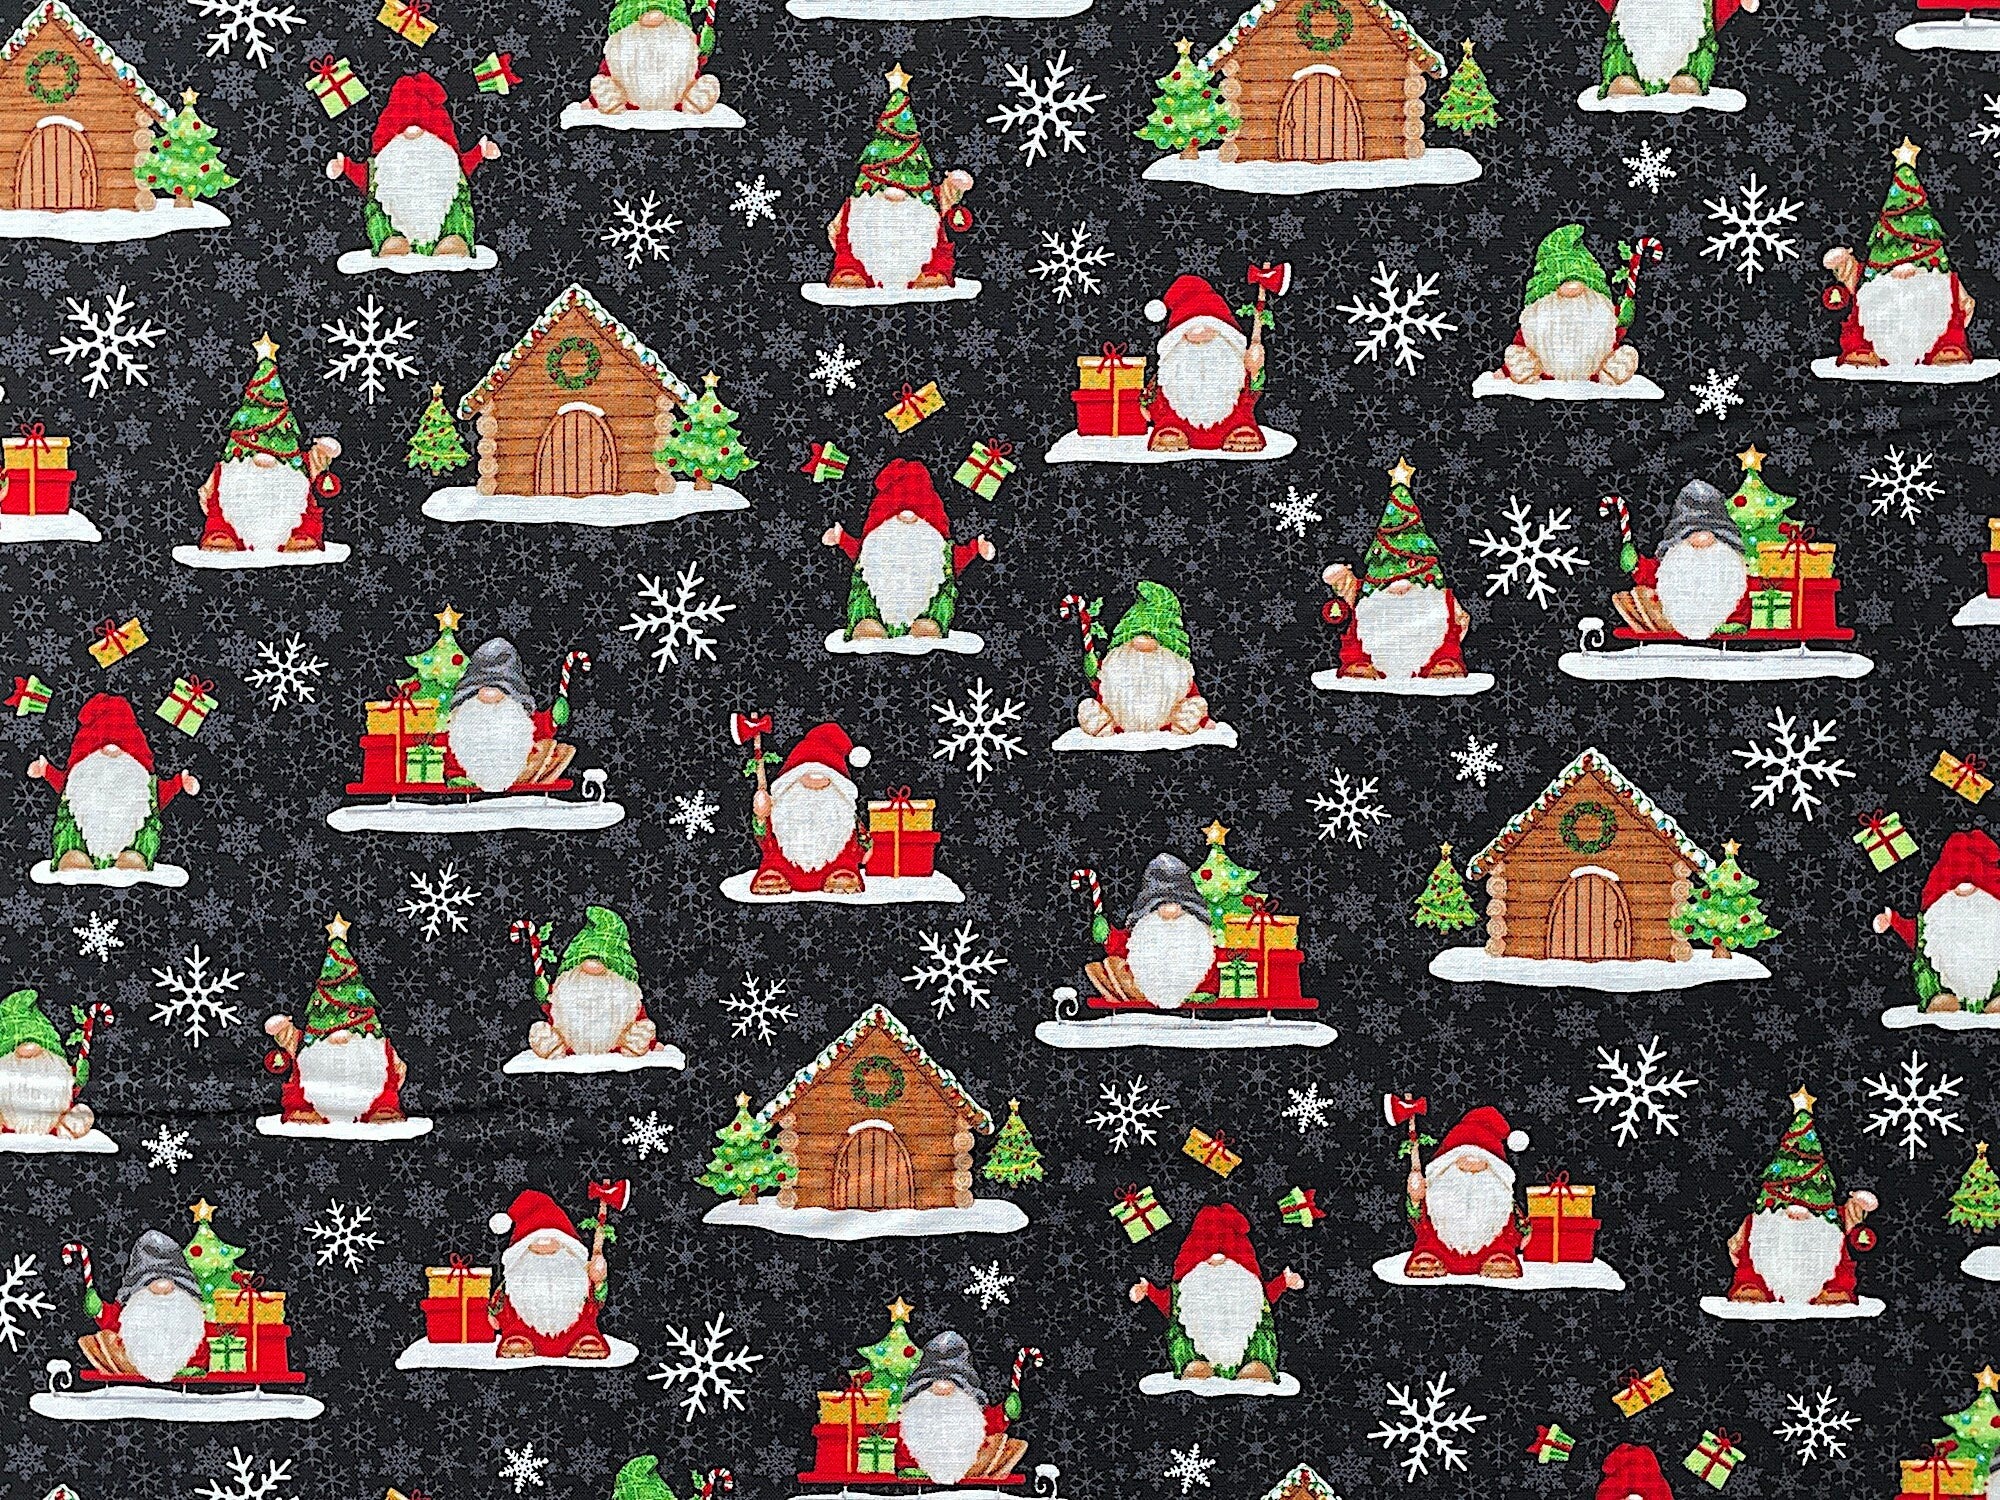 This black cotton fabric is covered with gnomes, gnome houses, Christmas trees, presents, snowflakes and more. The gnomes are tossing presents, holding candy canes or an ax. Snowflakes are sprinkled throughout the pattern.